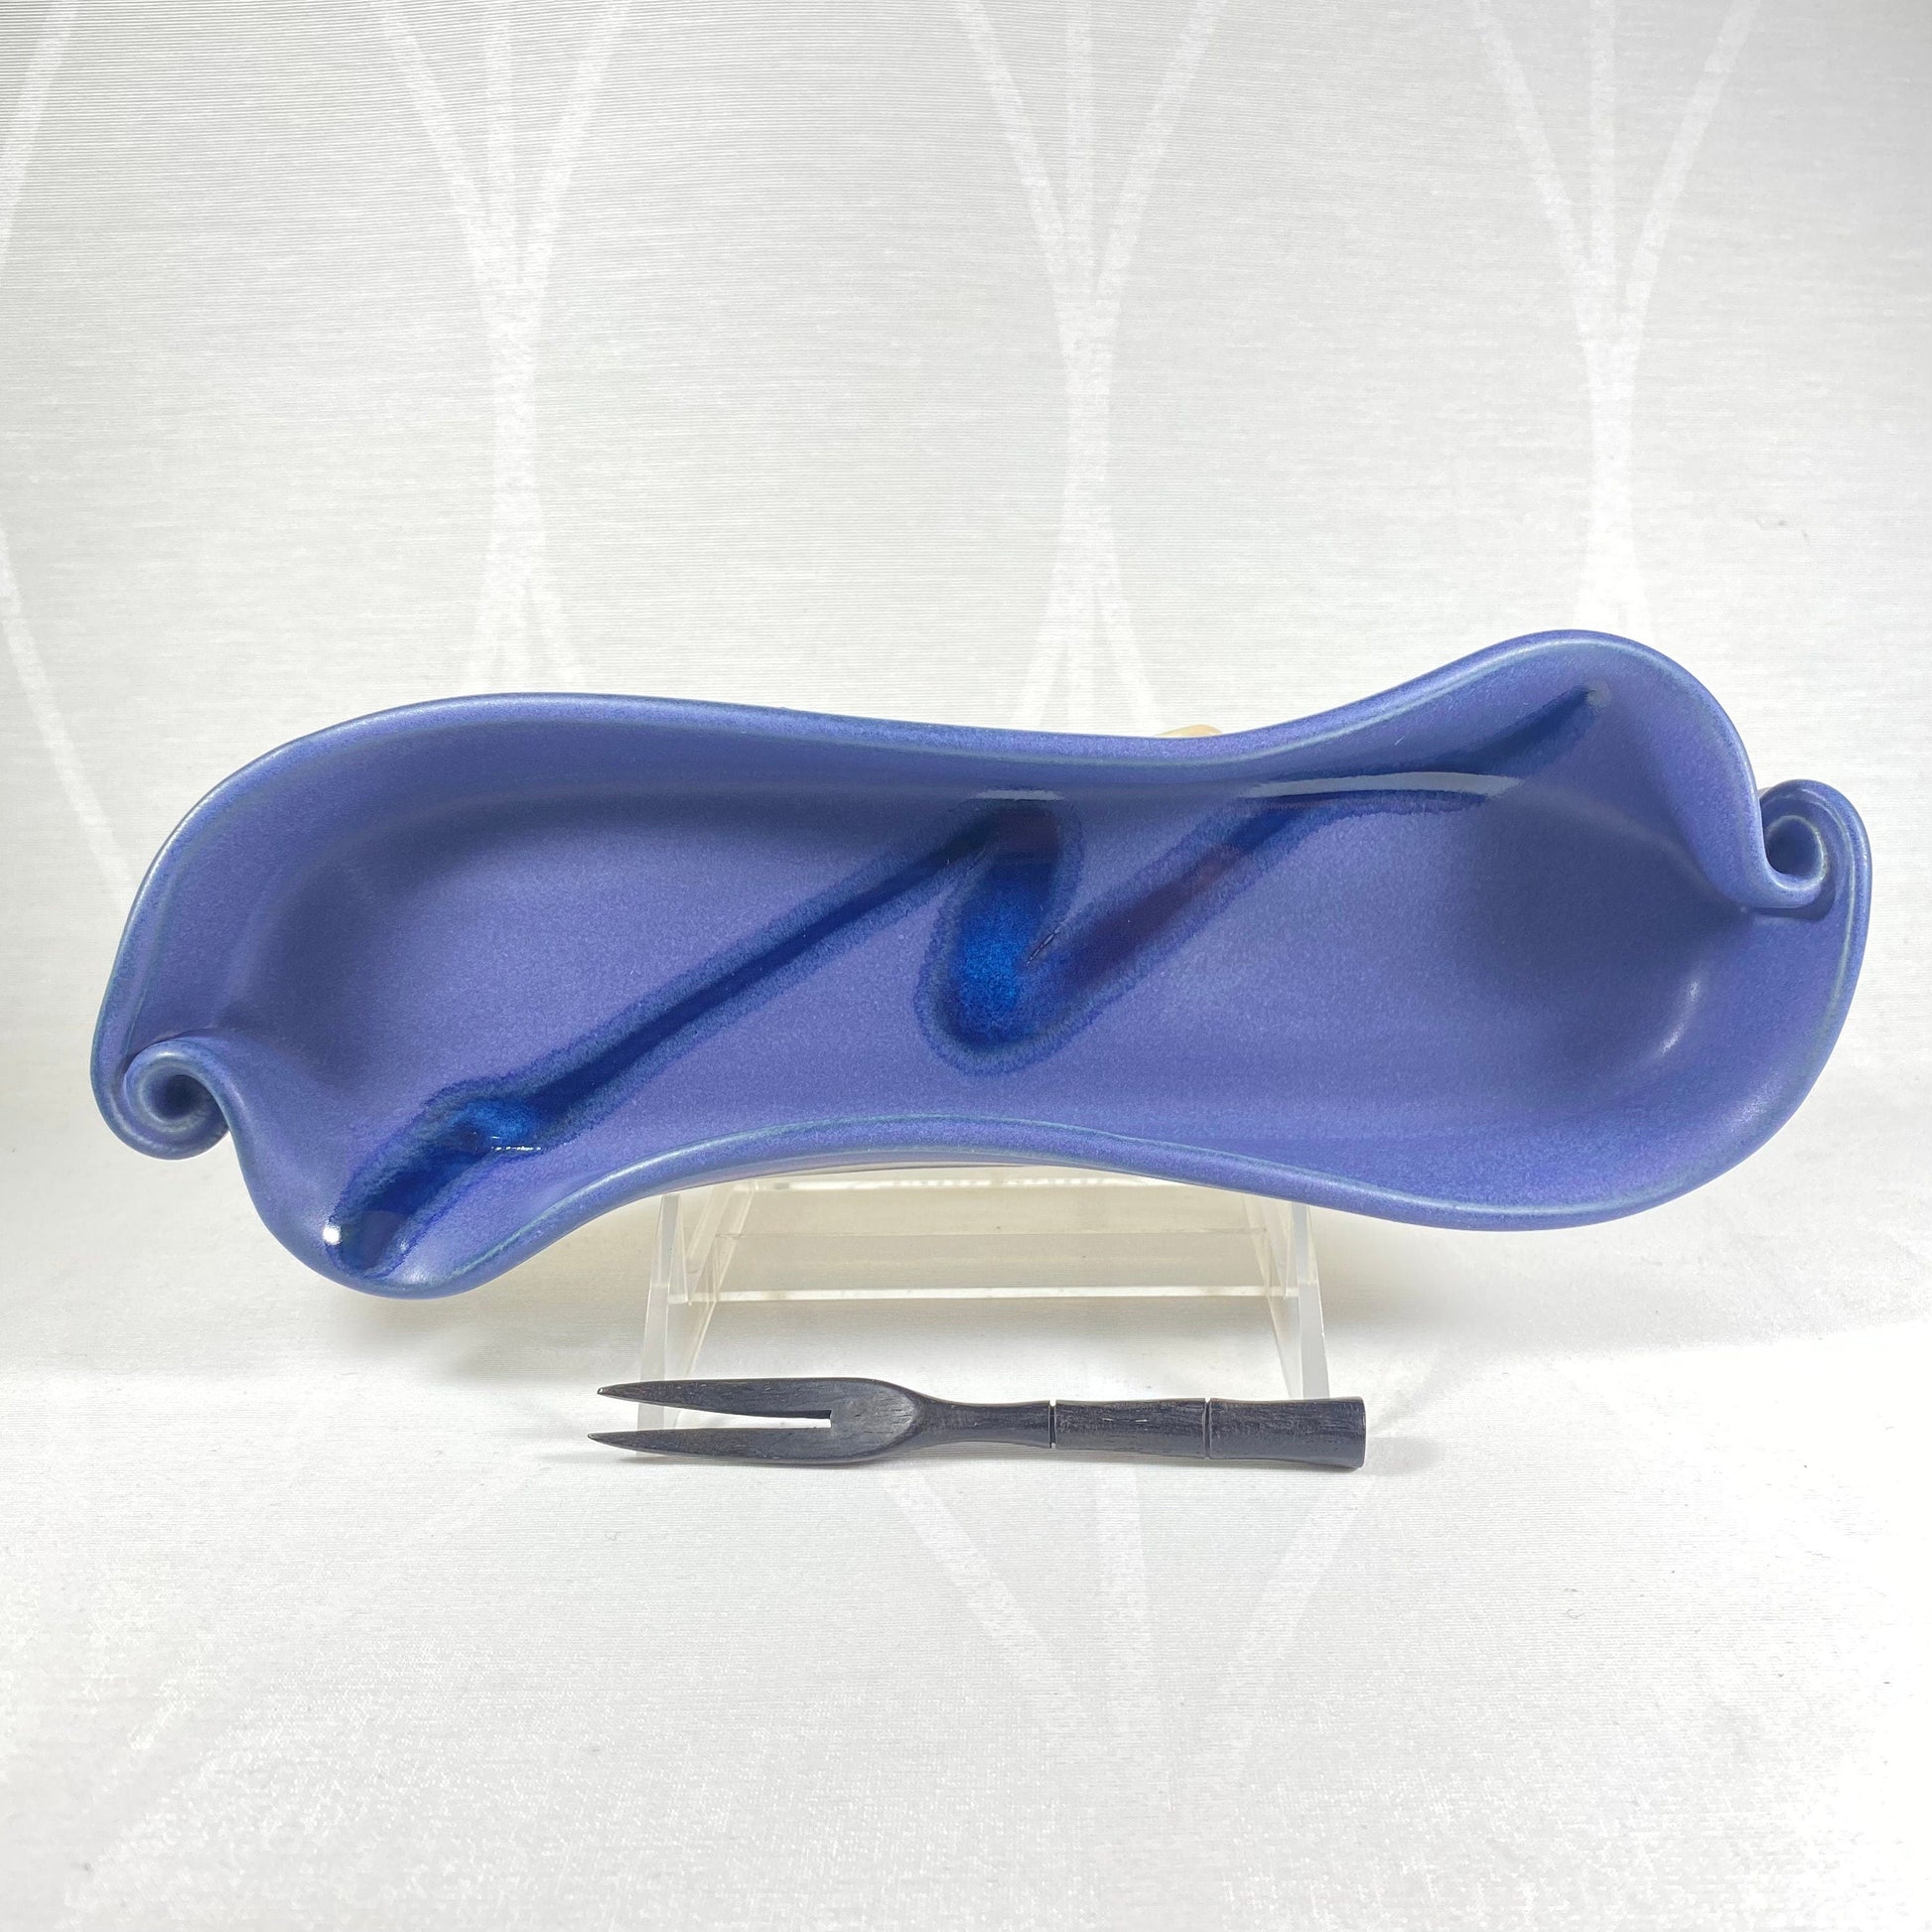 Handmade Purple and Blue Olive Dish with Small Fork, Functional and Decorative Pottery